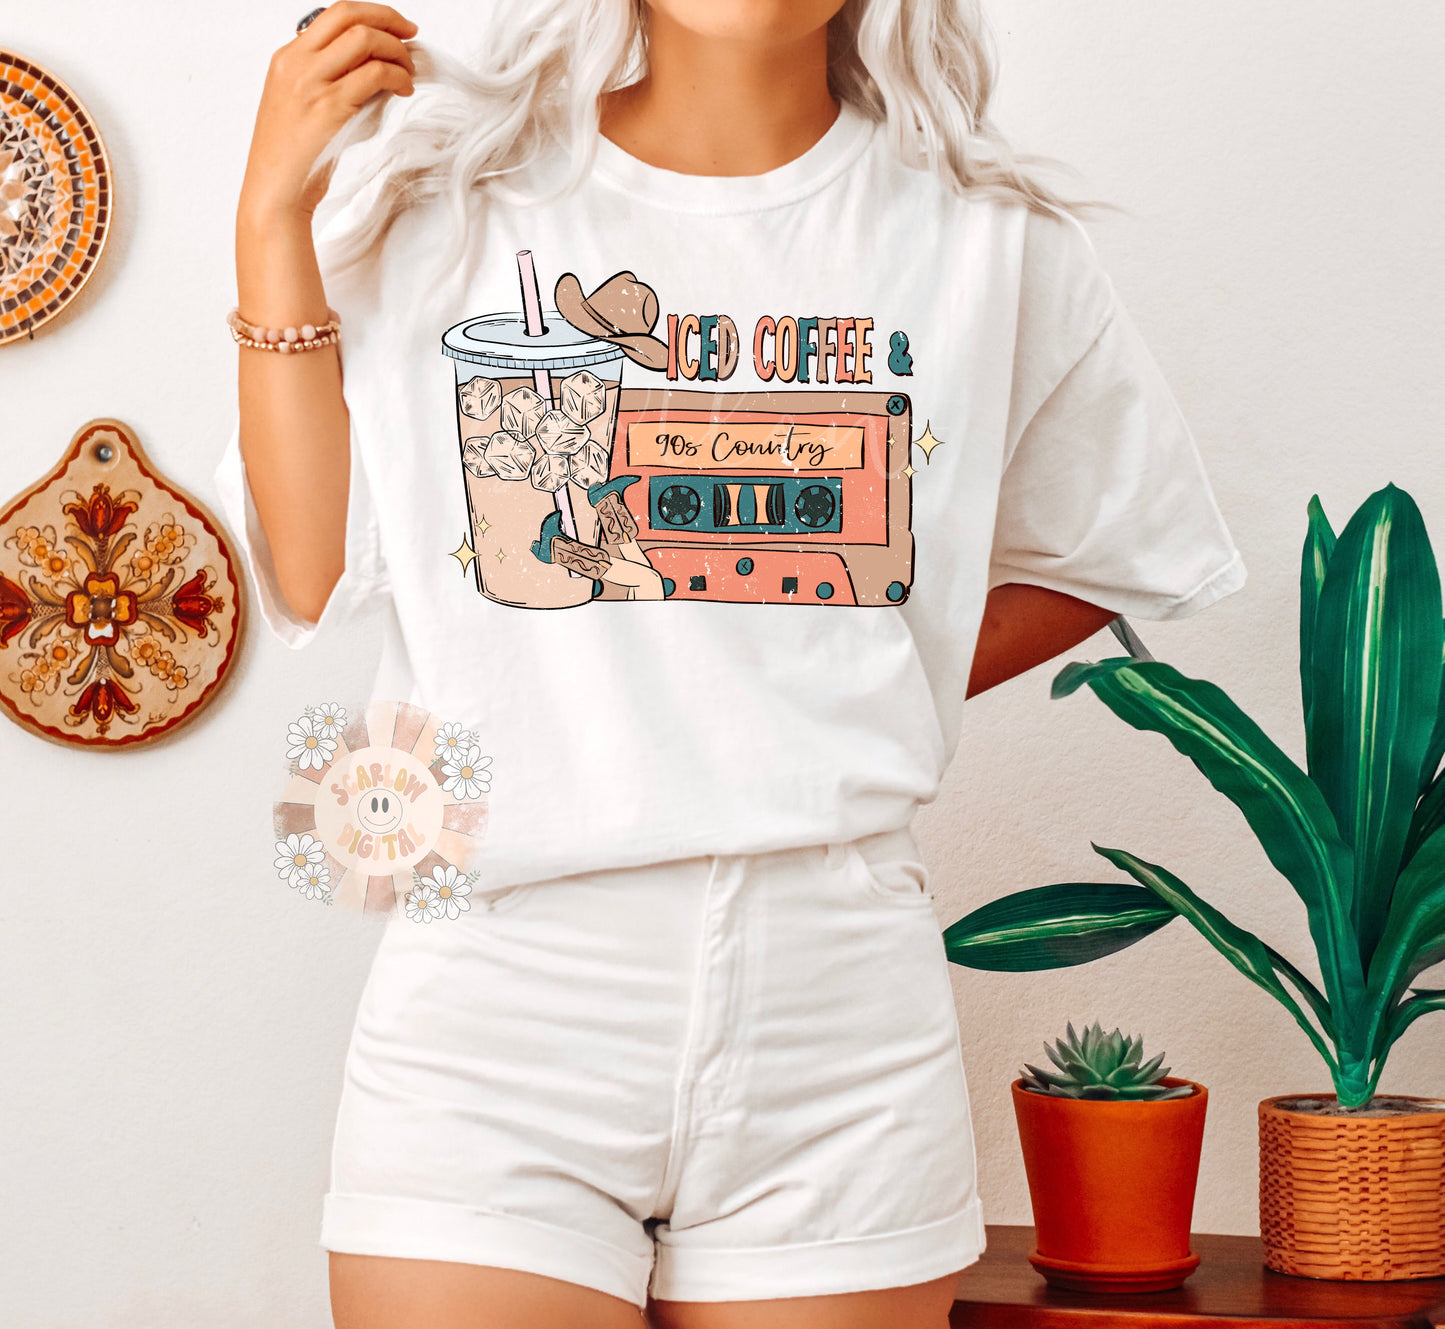 Iced Coffee and 90s Country PNG-Western Sublimation Digital Design Download-country music png, cowgirl png, cowboy png, adult png design